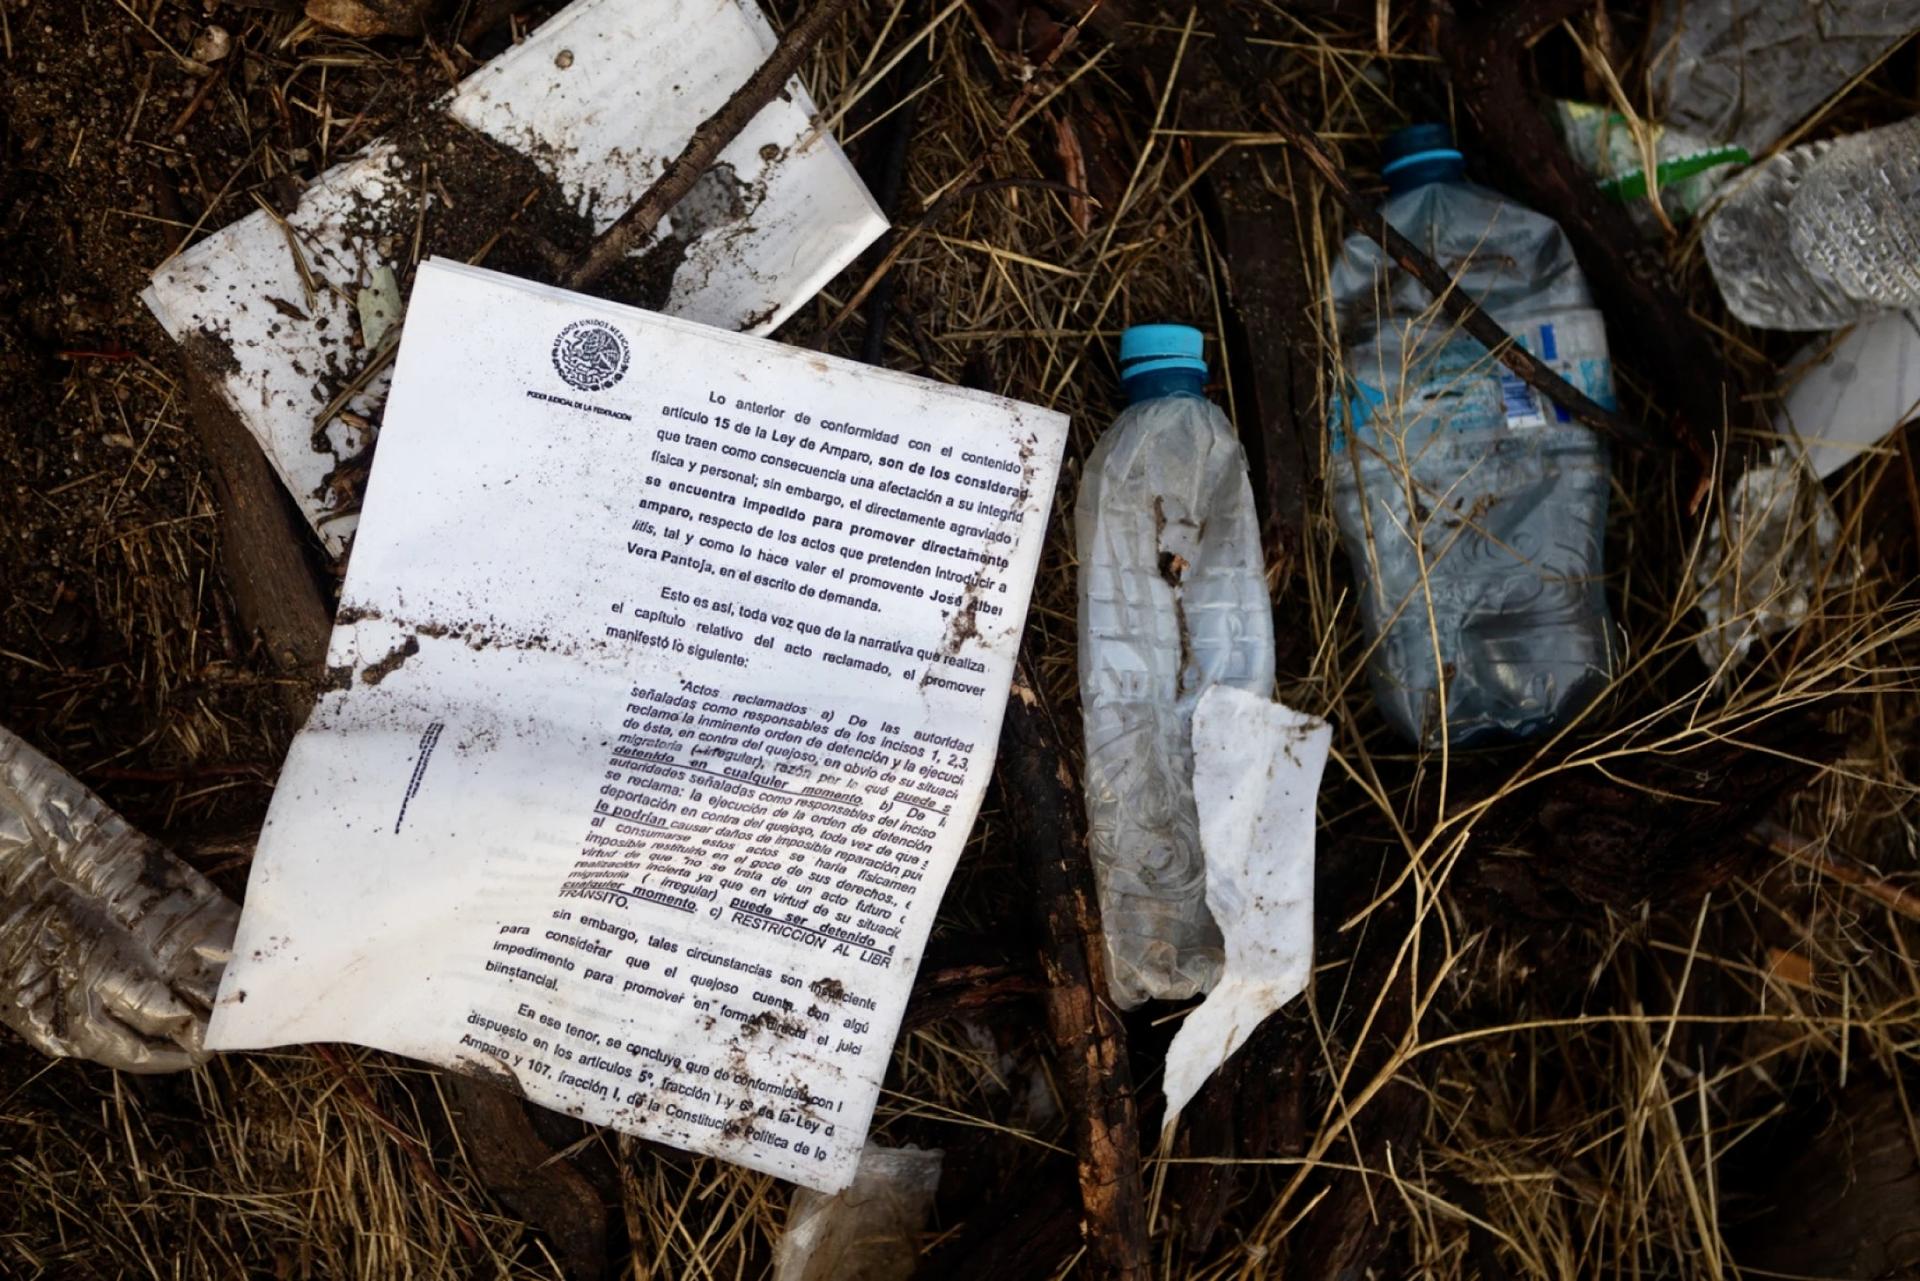 Among water bottles and food wrappers discarded papers detailing Mexican immigration laws are shown.